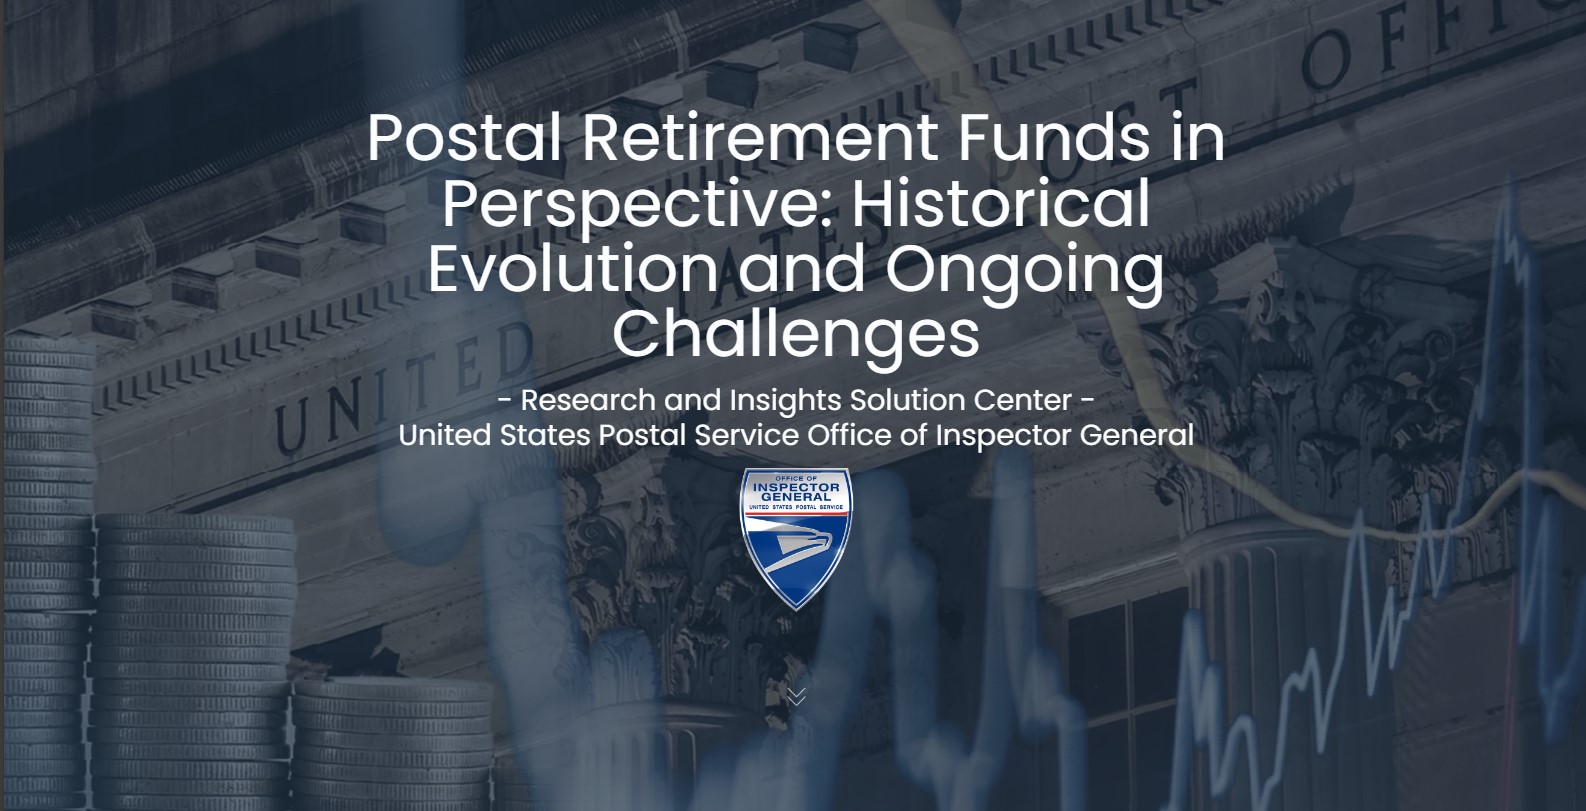 Postal Retirement Funds Story Image